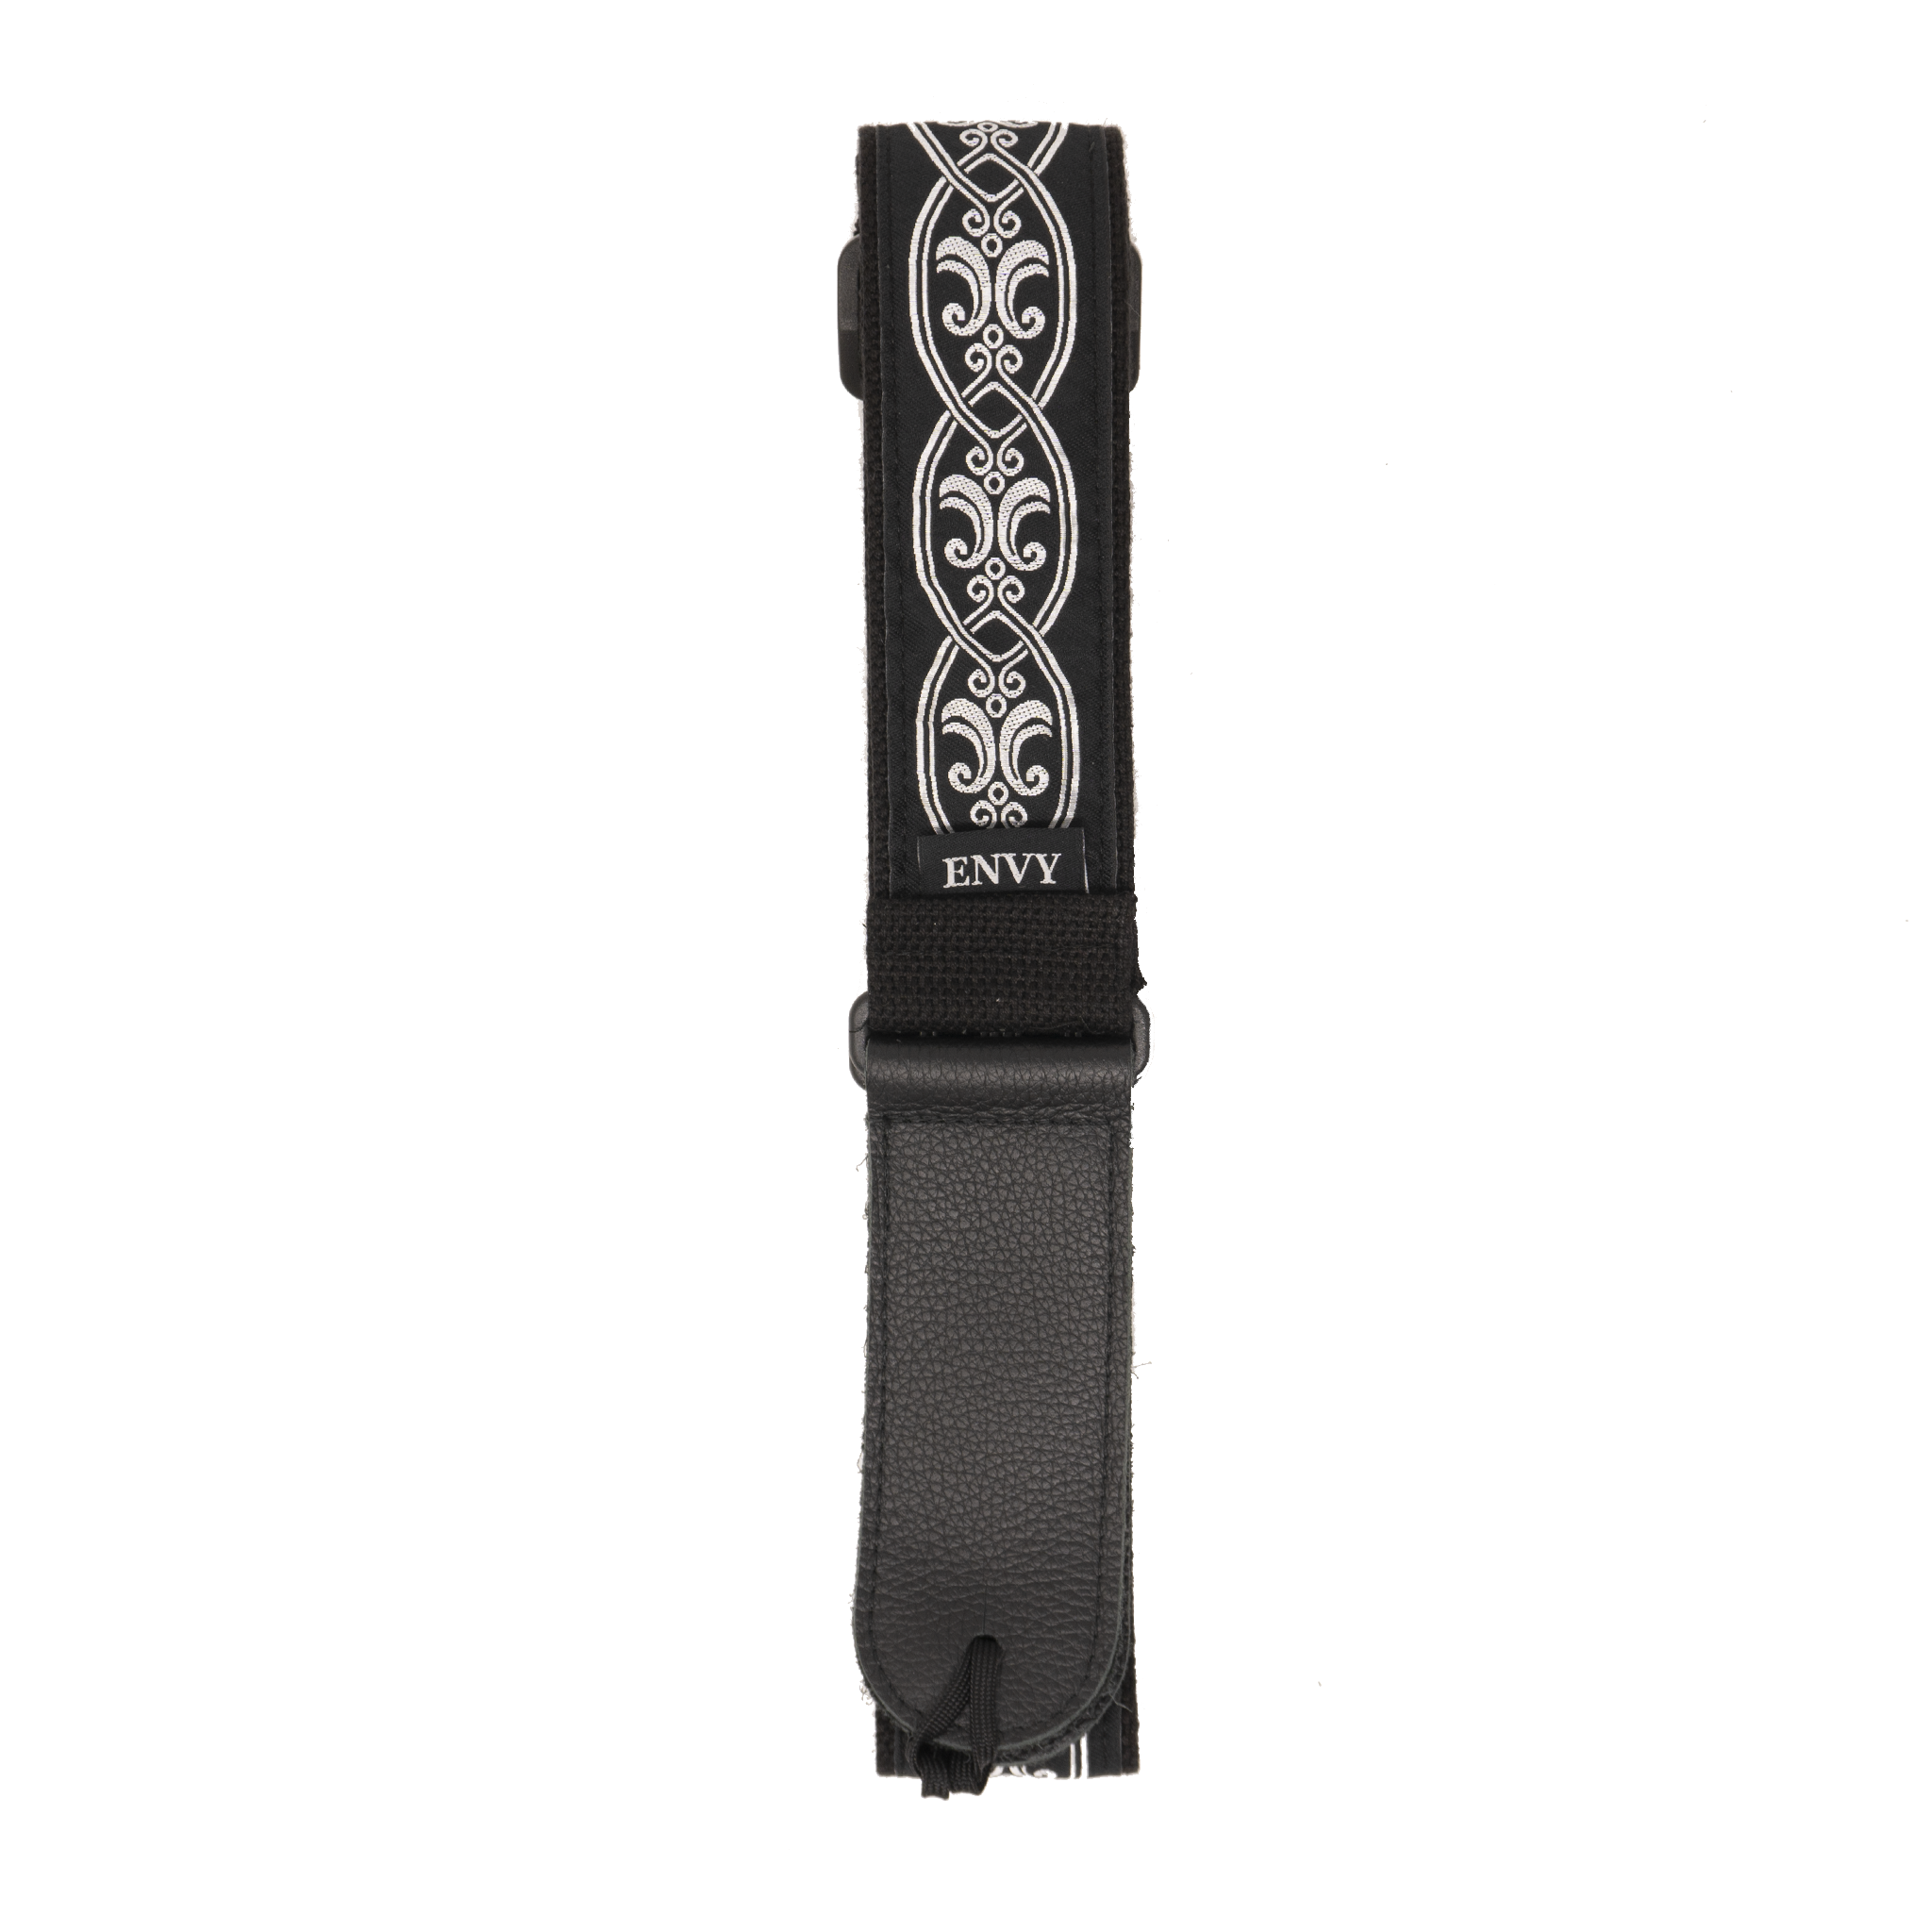 My Fave Guitar Strap in Blackened Silver